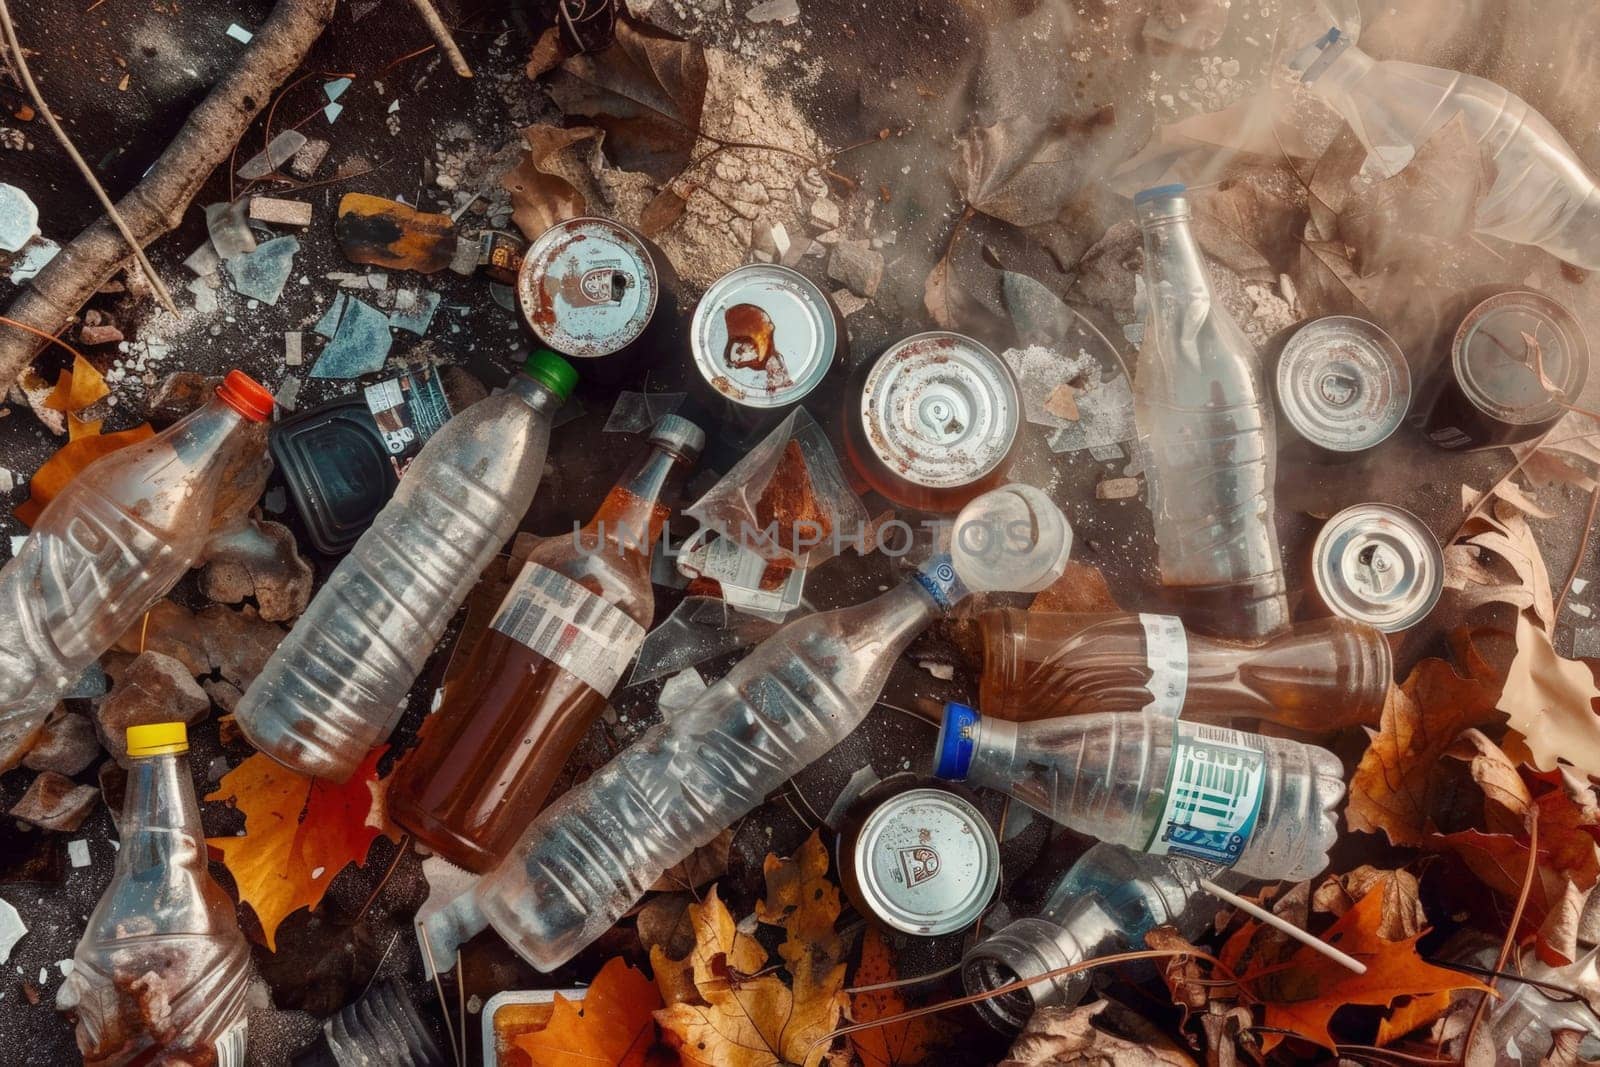 A pile of trash including bottles, cans, and other debris by nateemee